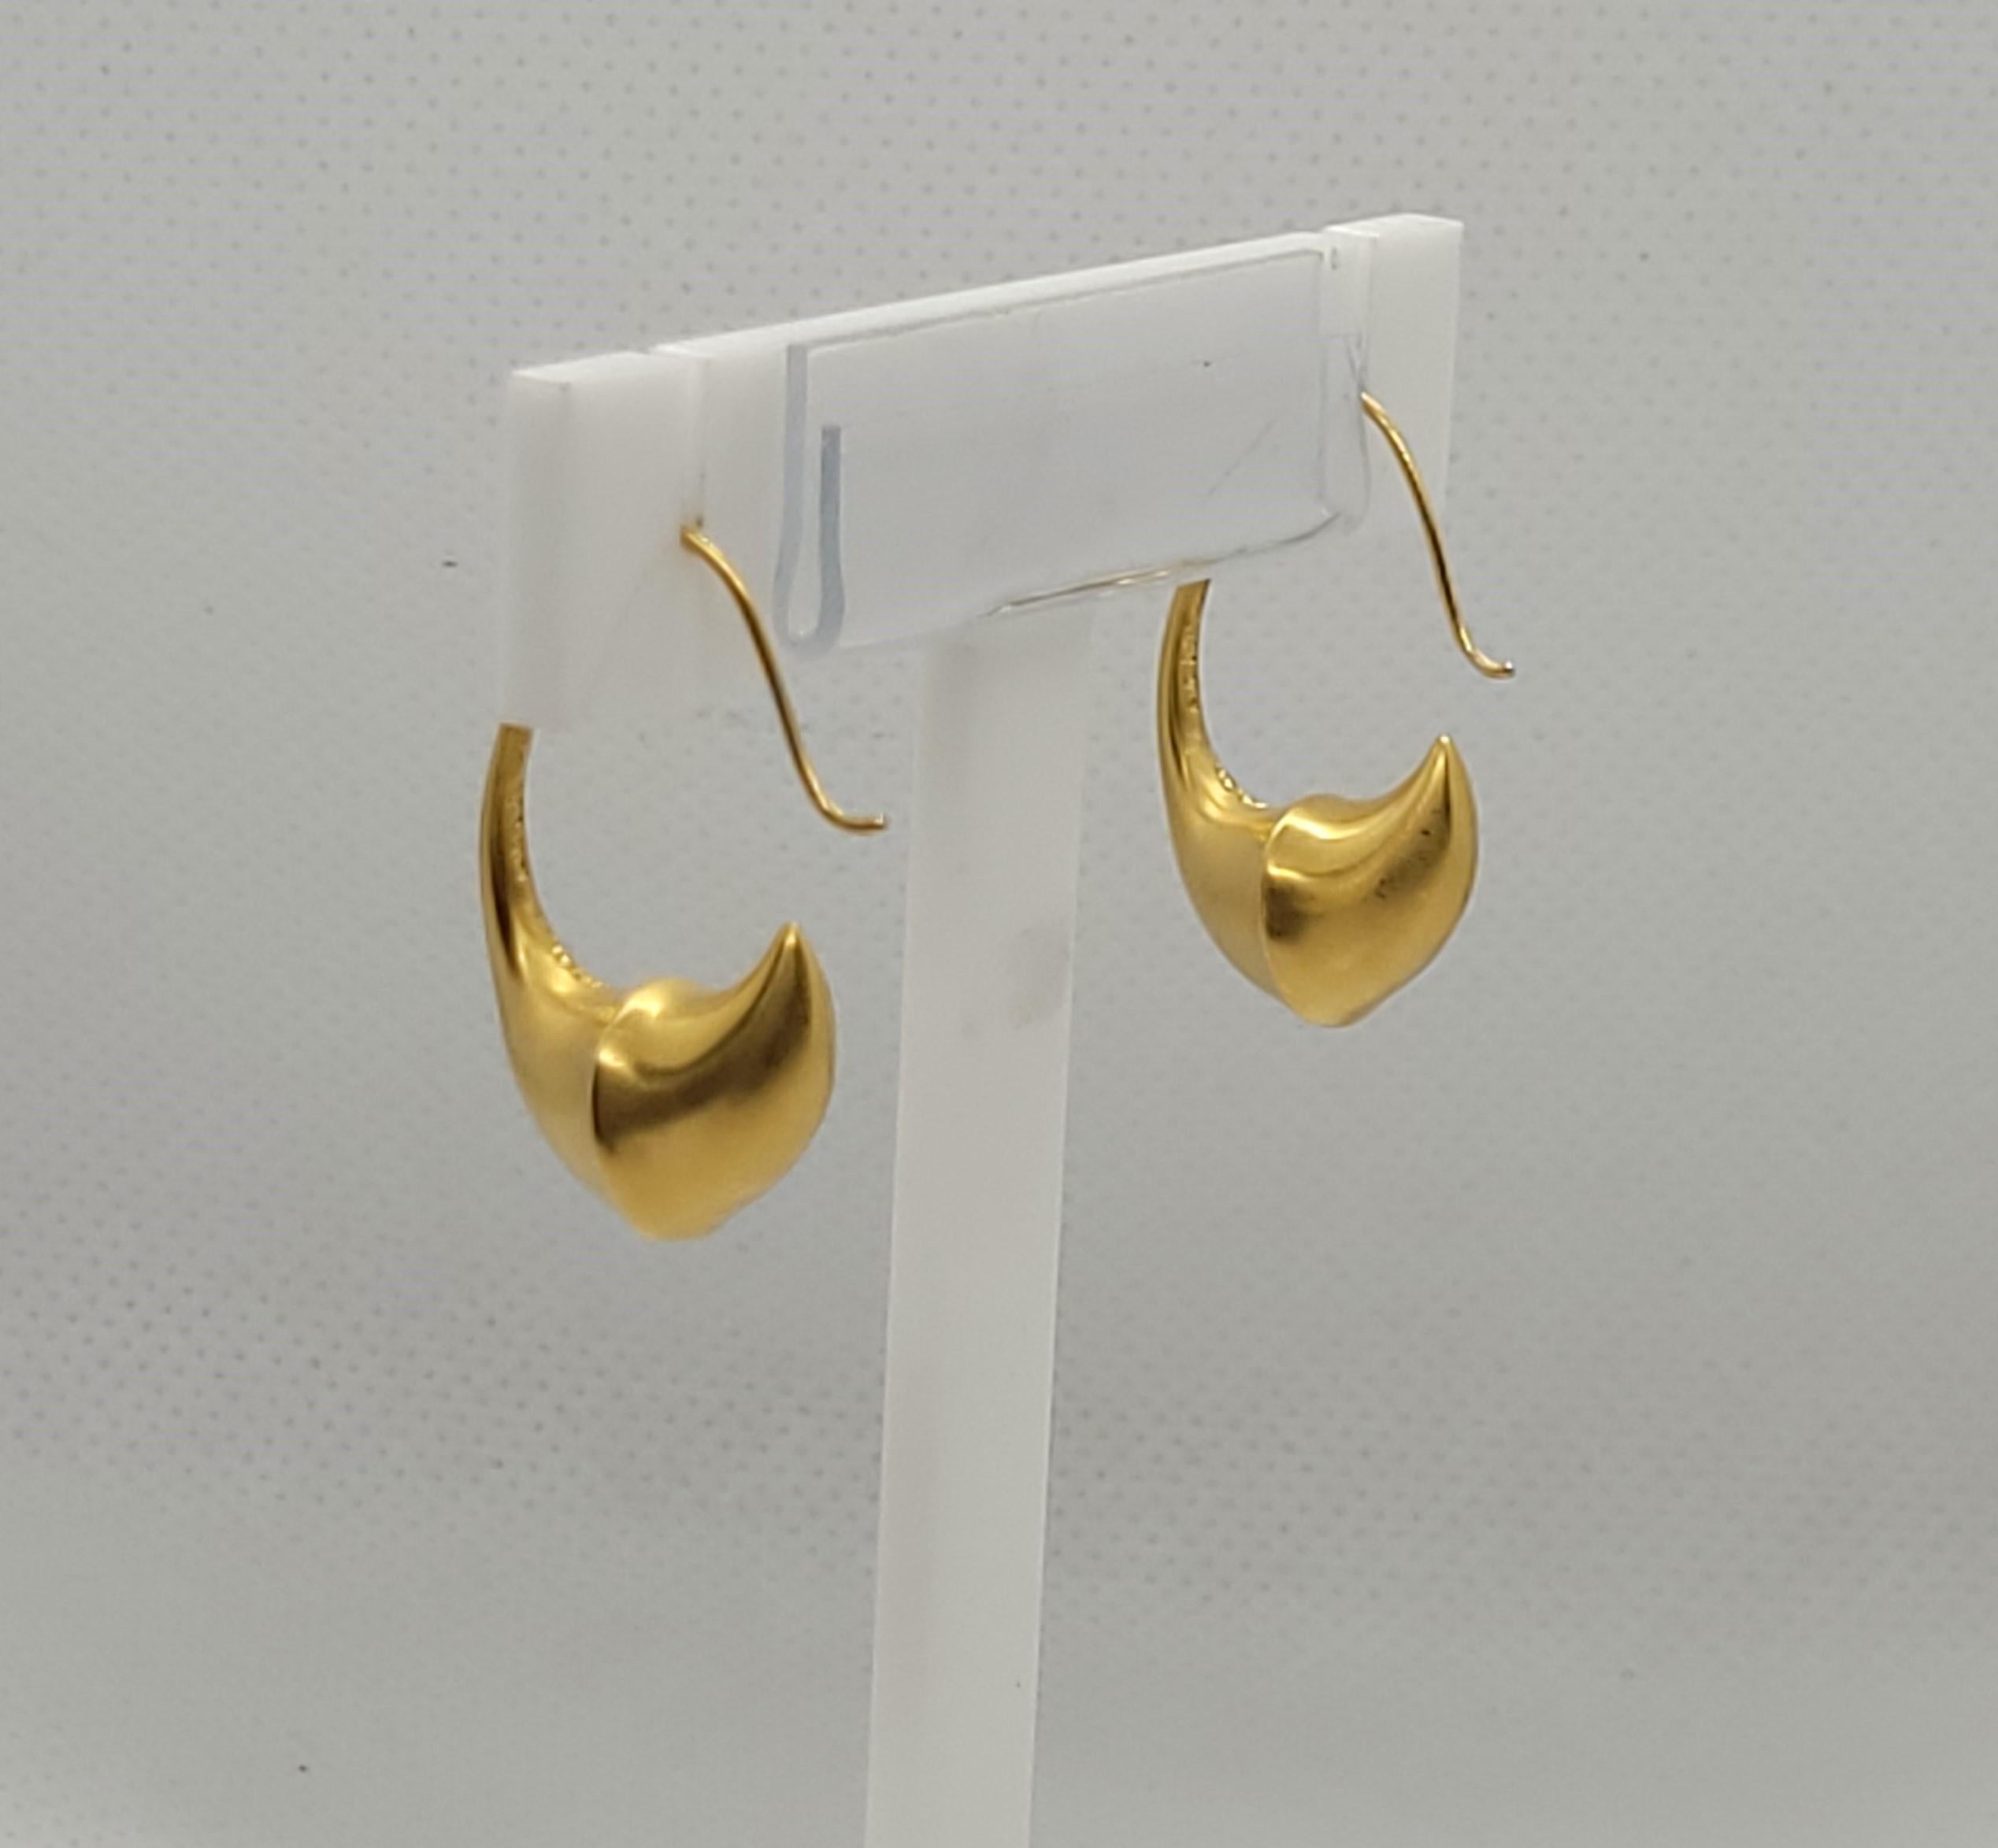 14kt Yellow Gold Hook Earrings Satin Finish 8.17 Grams In Good Condition For Sale In Rancho Santa Fe, CA